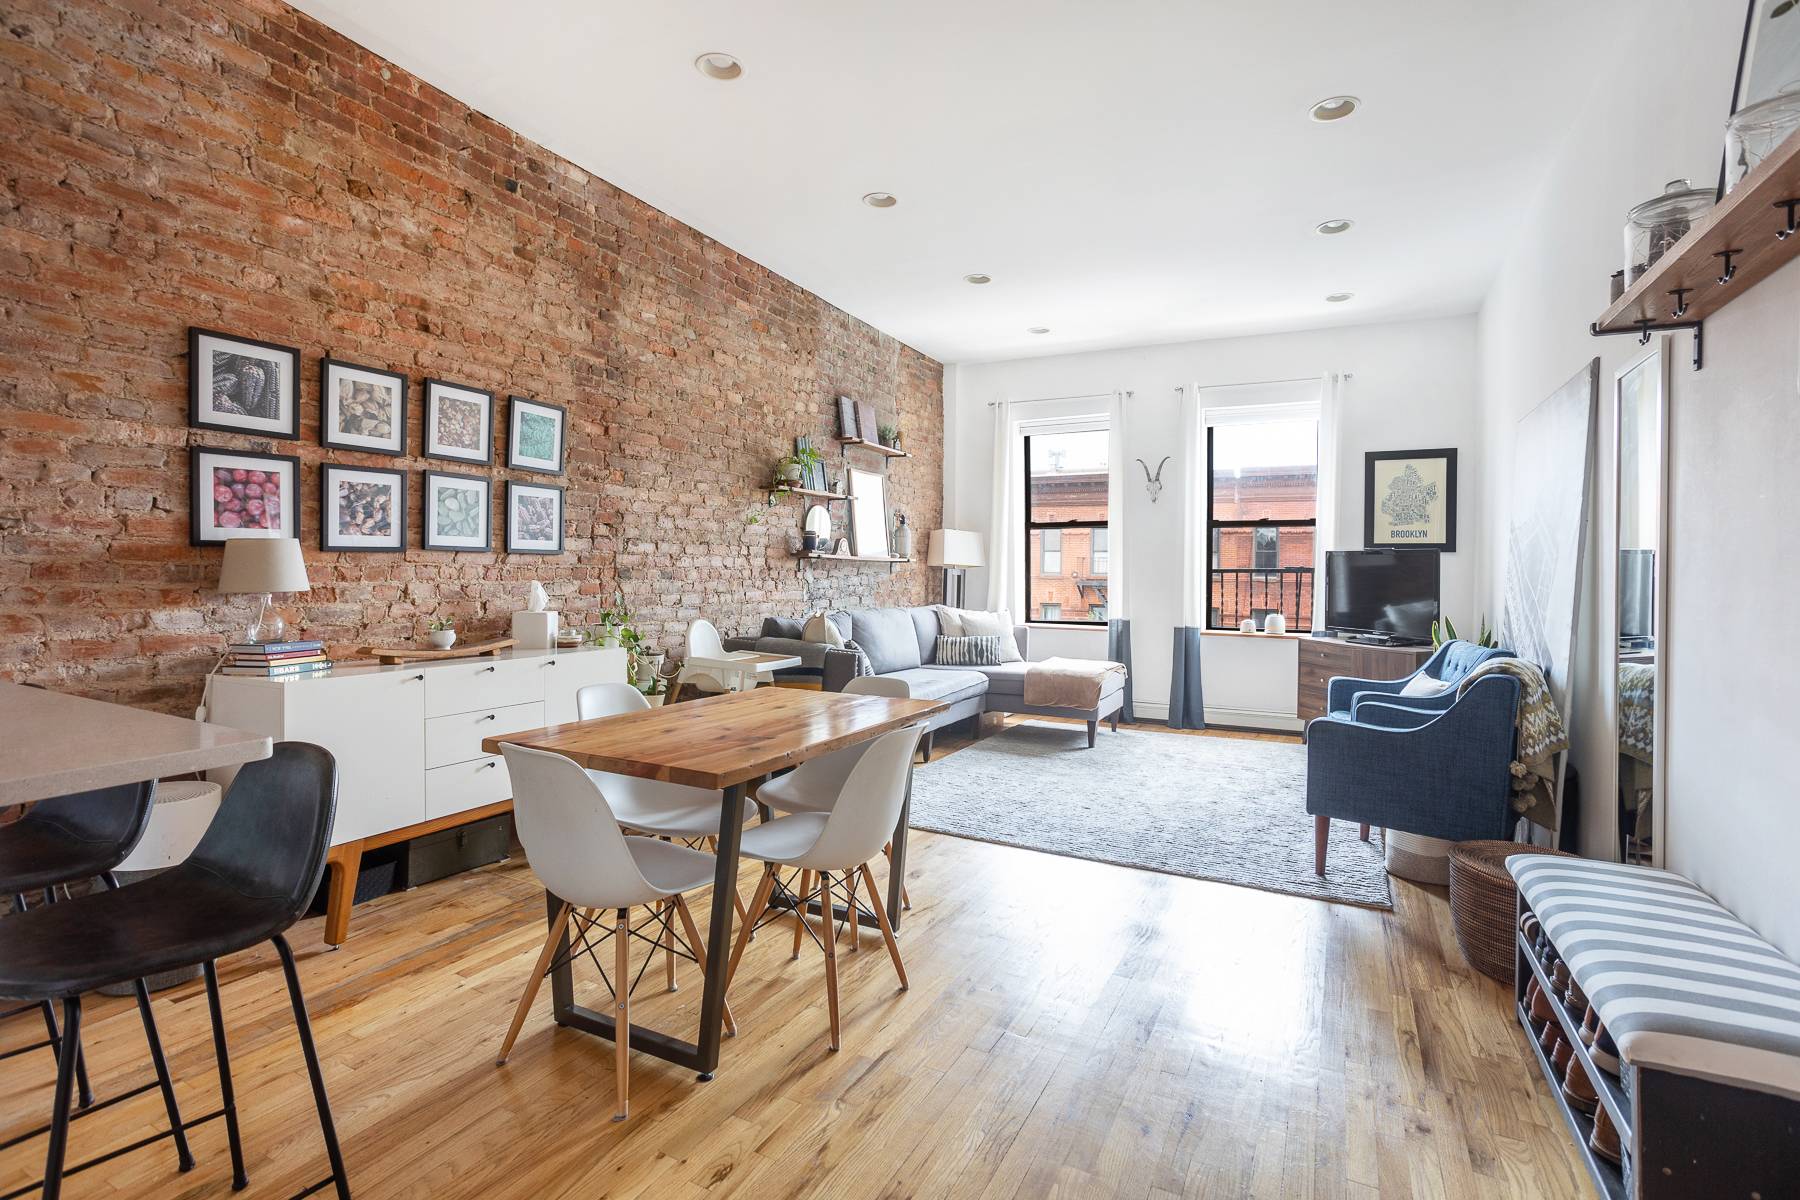 The moment you open the front door you ll be drawn into a sunny, open concept living room accented by beautiful exposed brick, a 10 foot high ceiling, and a ...